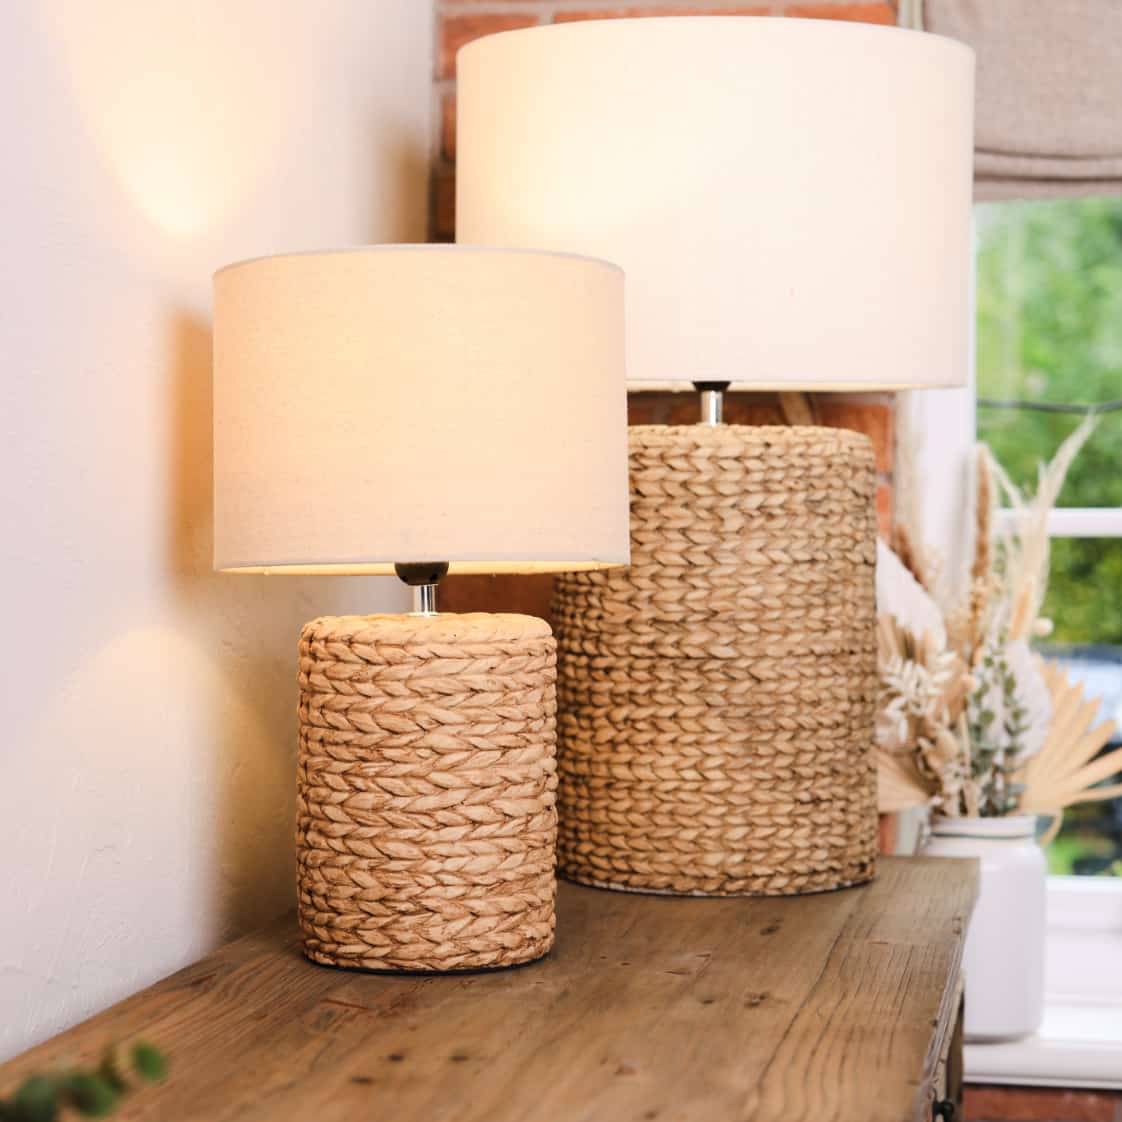 Pair of lamps with neutral rope effect base and light linen shade. Both switched on, on wooden console table.